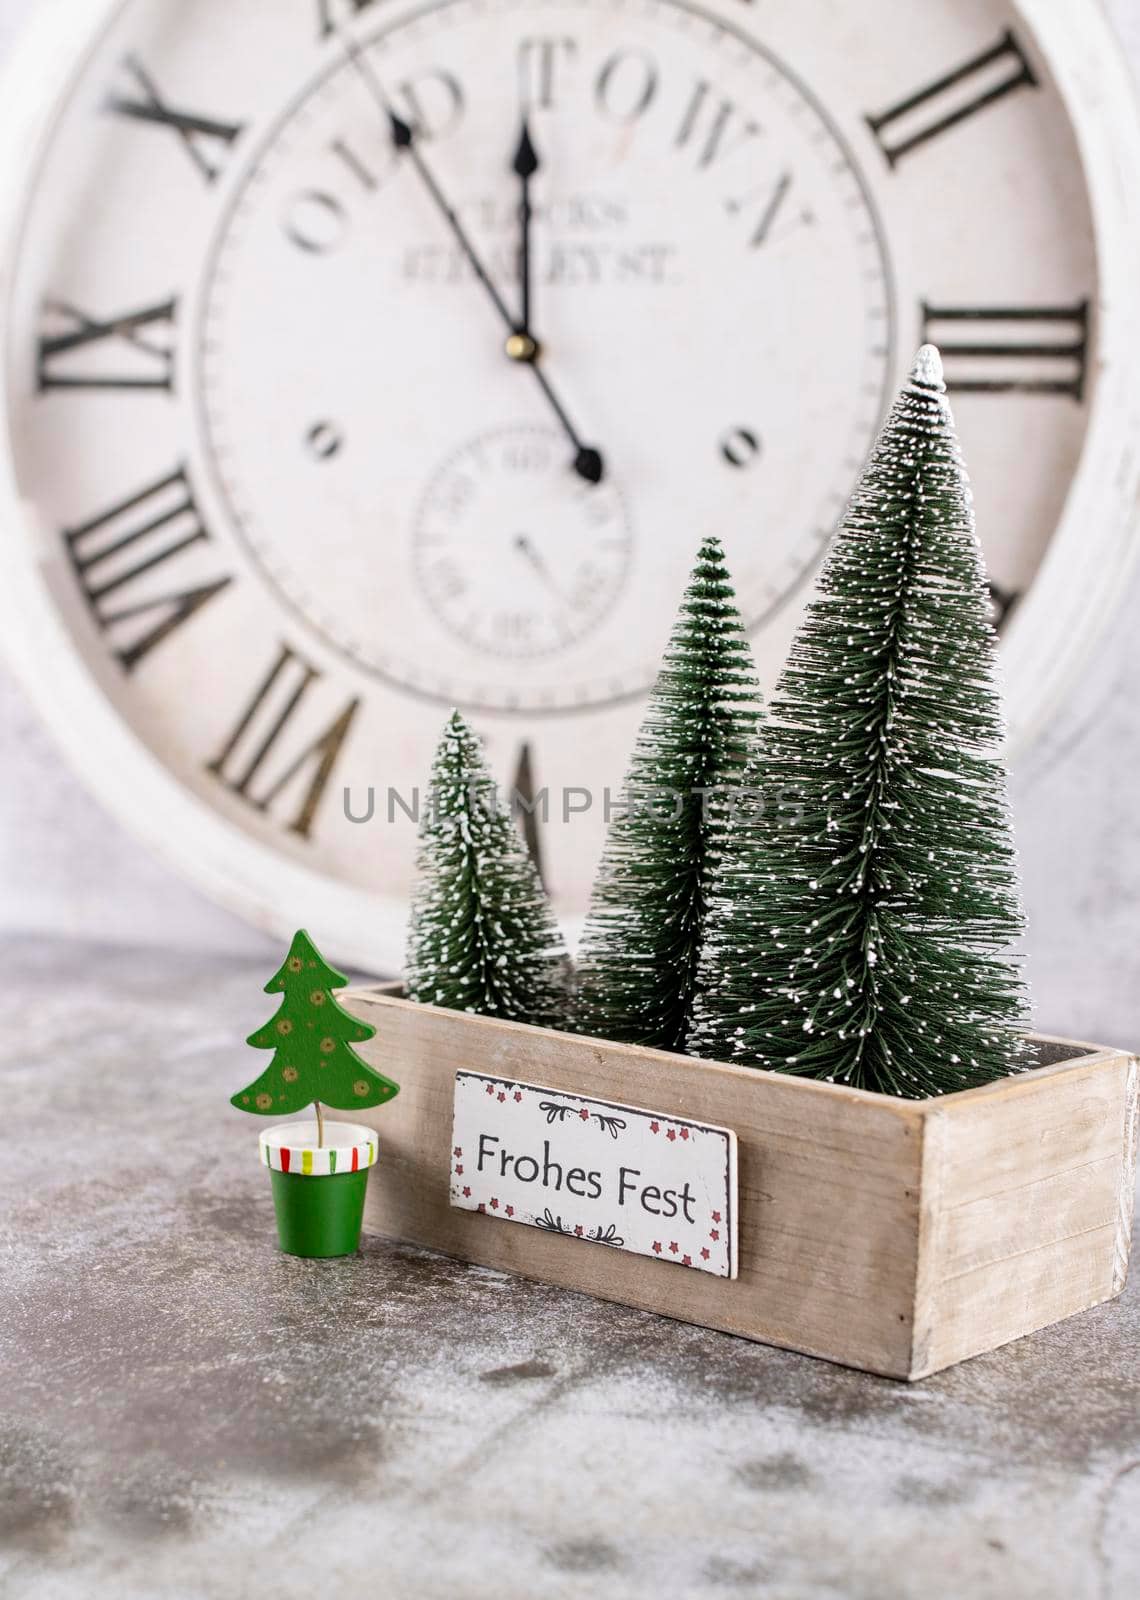 New Year's clock. Decorated with christmas tree decorations background. Celebration Concept for New Year Eve.